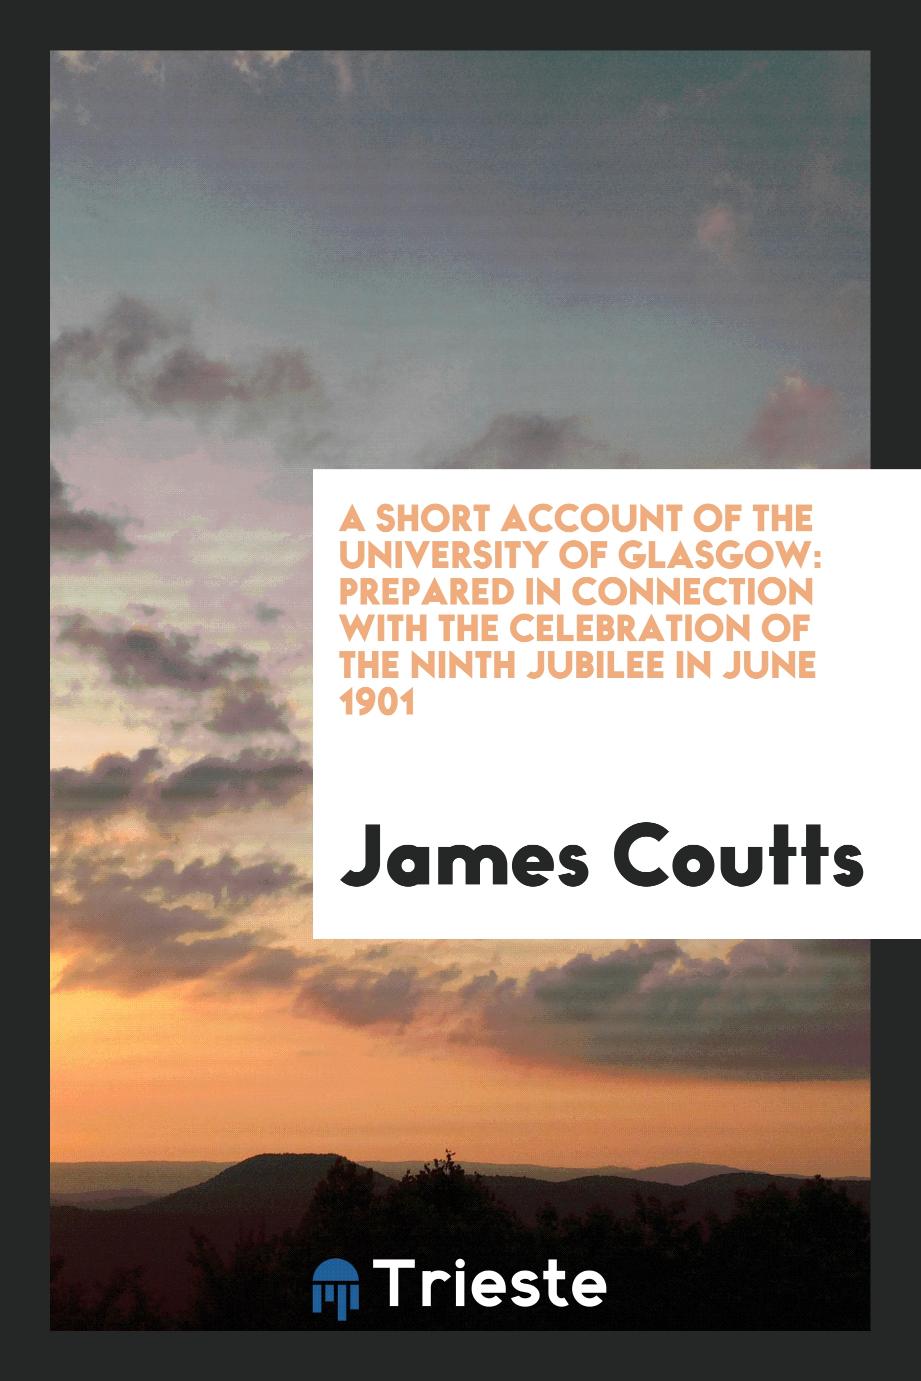 A Short Account of the University of Glasgow: Prepared in Connection with the Celebration of the ninth jubilee in June 1901